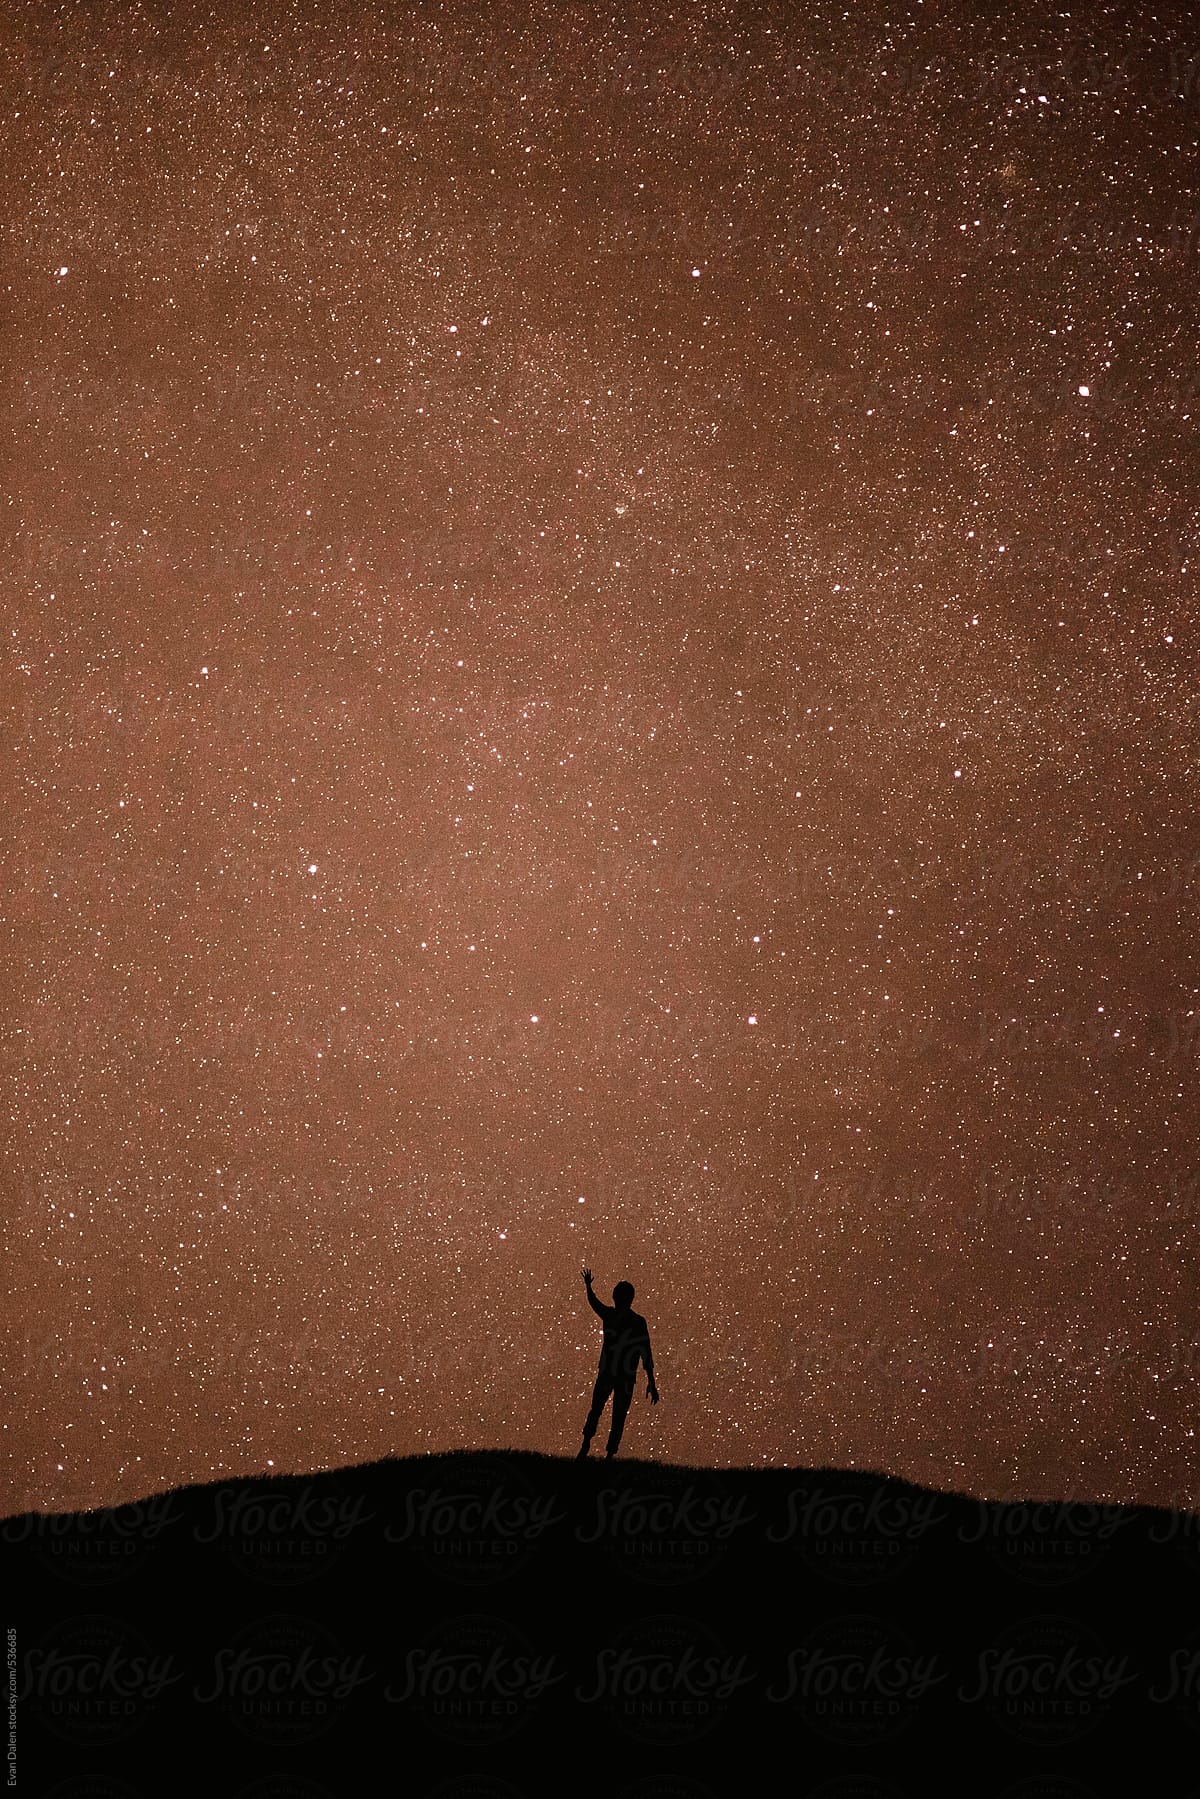 Silhouette of man reaching for the stars